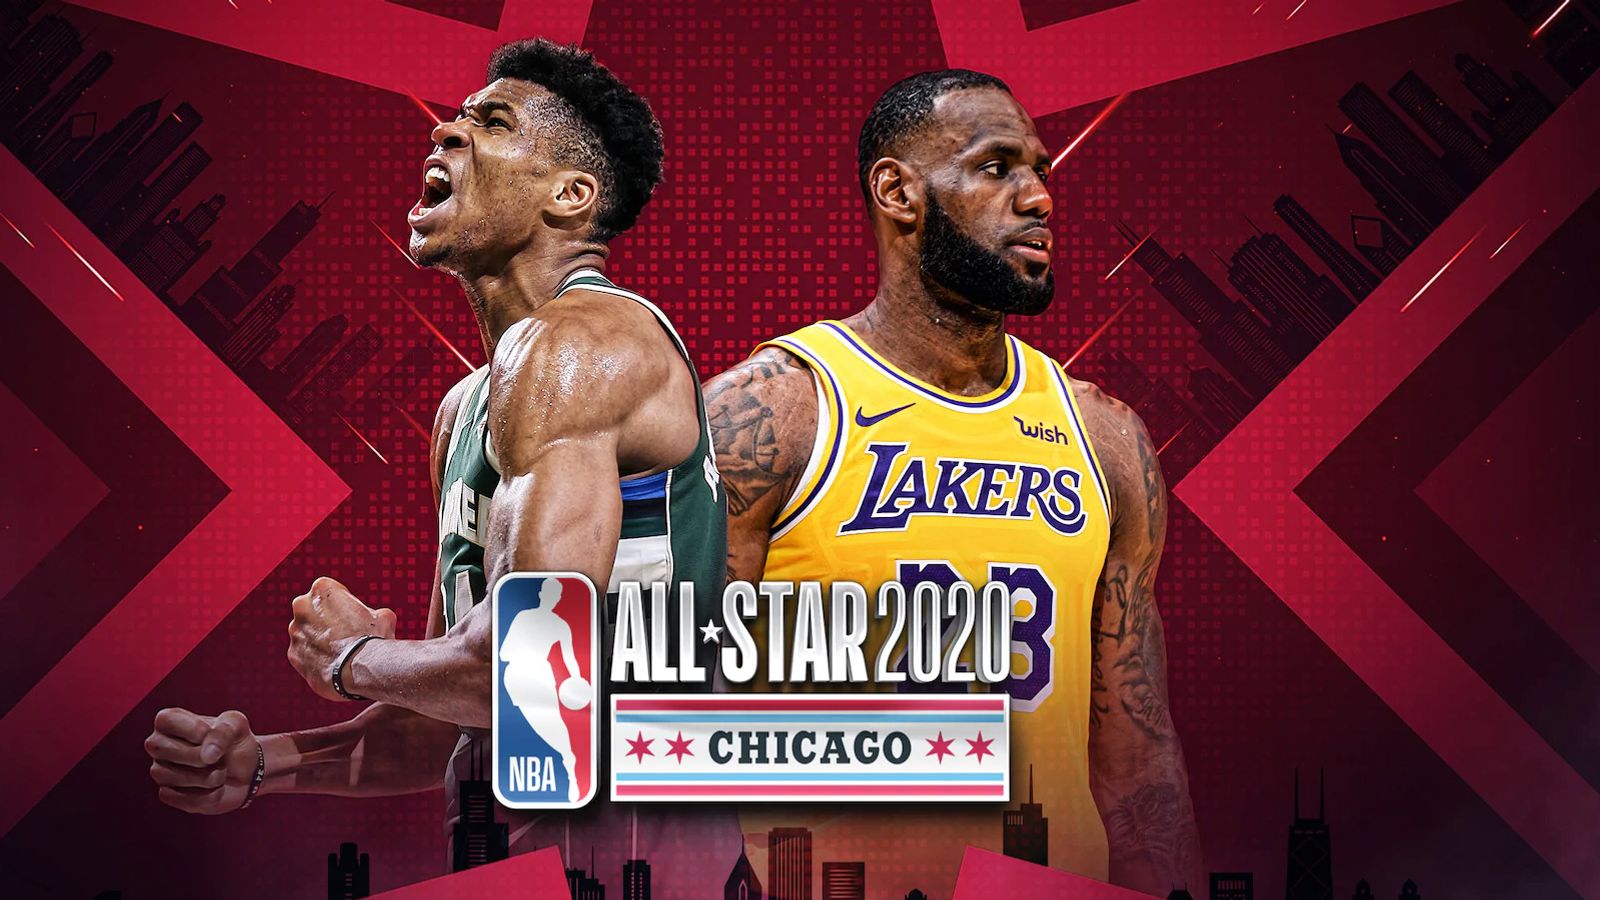 All Star 2020 Lebron James And Giannis Antetokoumpo Draft All Star Game Rosters Nba News Sky Sports